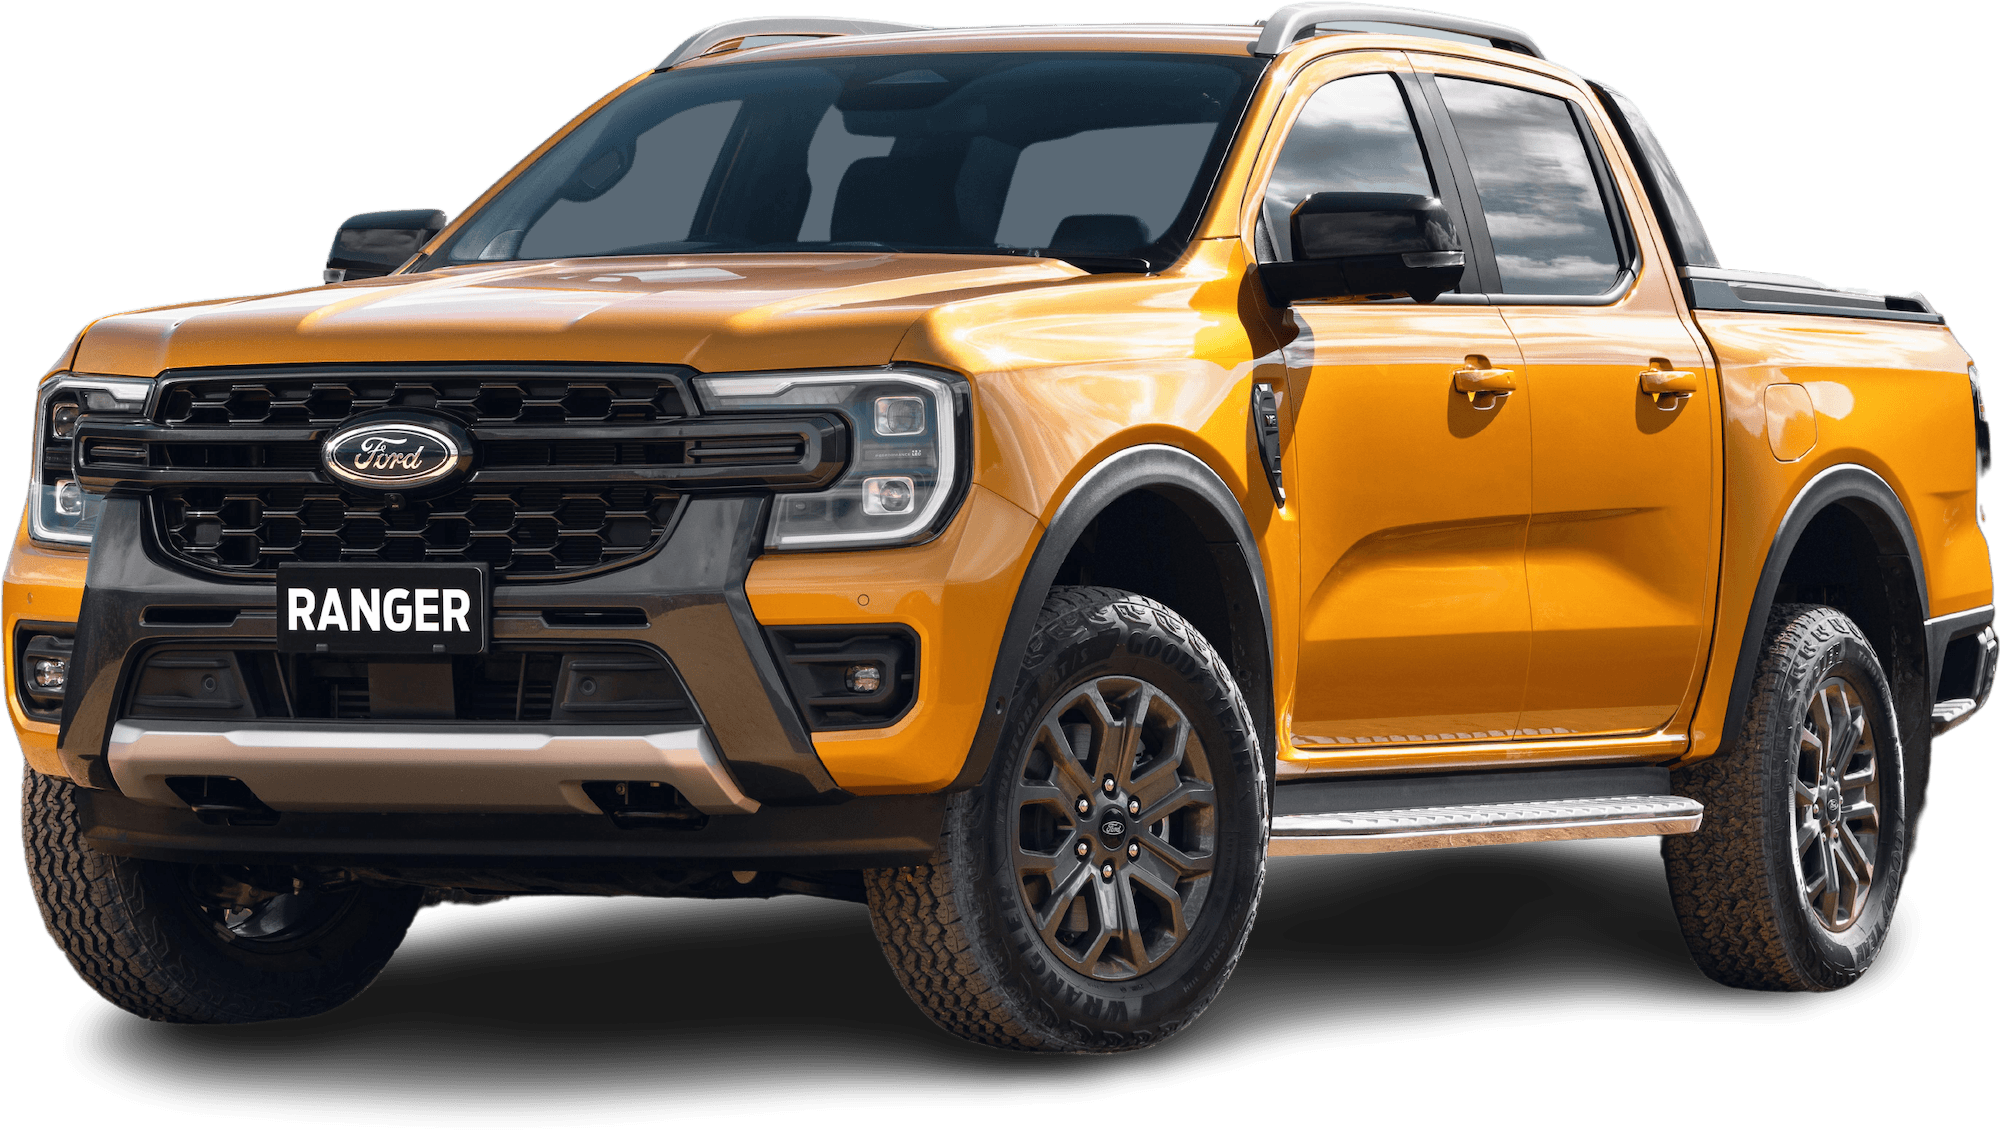 Find your best Ford Ranger finance rate with Driva